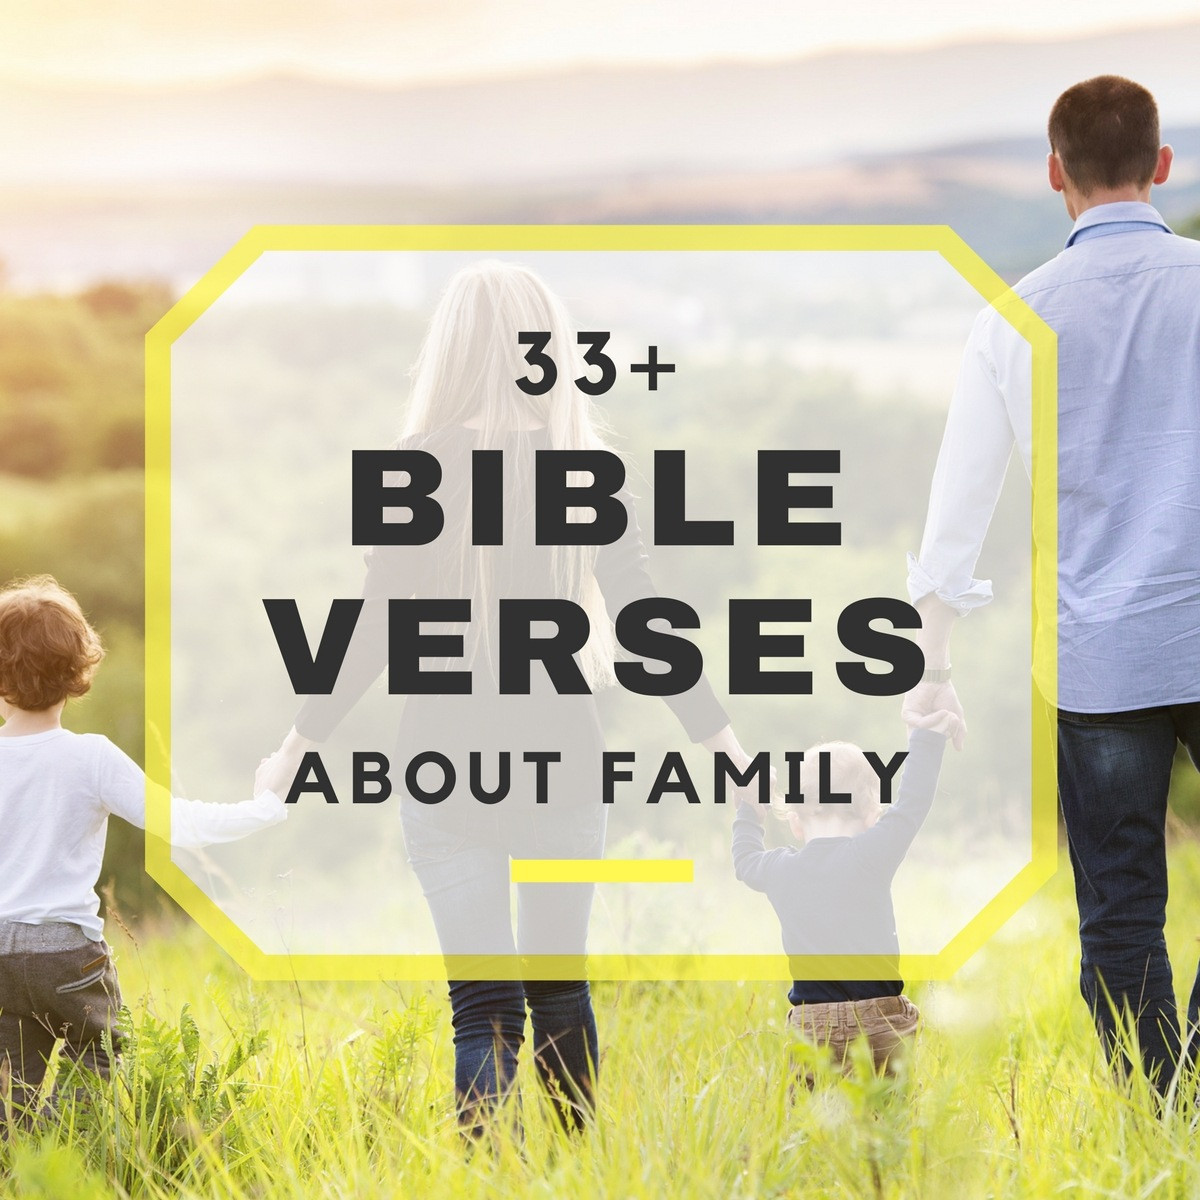 Biblical Quotes About Family
 33 Bible Verses About Family Bible Scriptures About